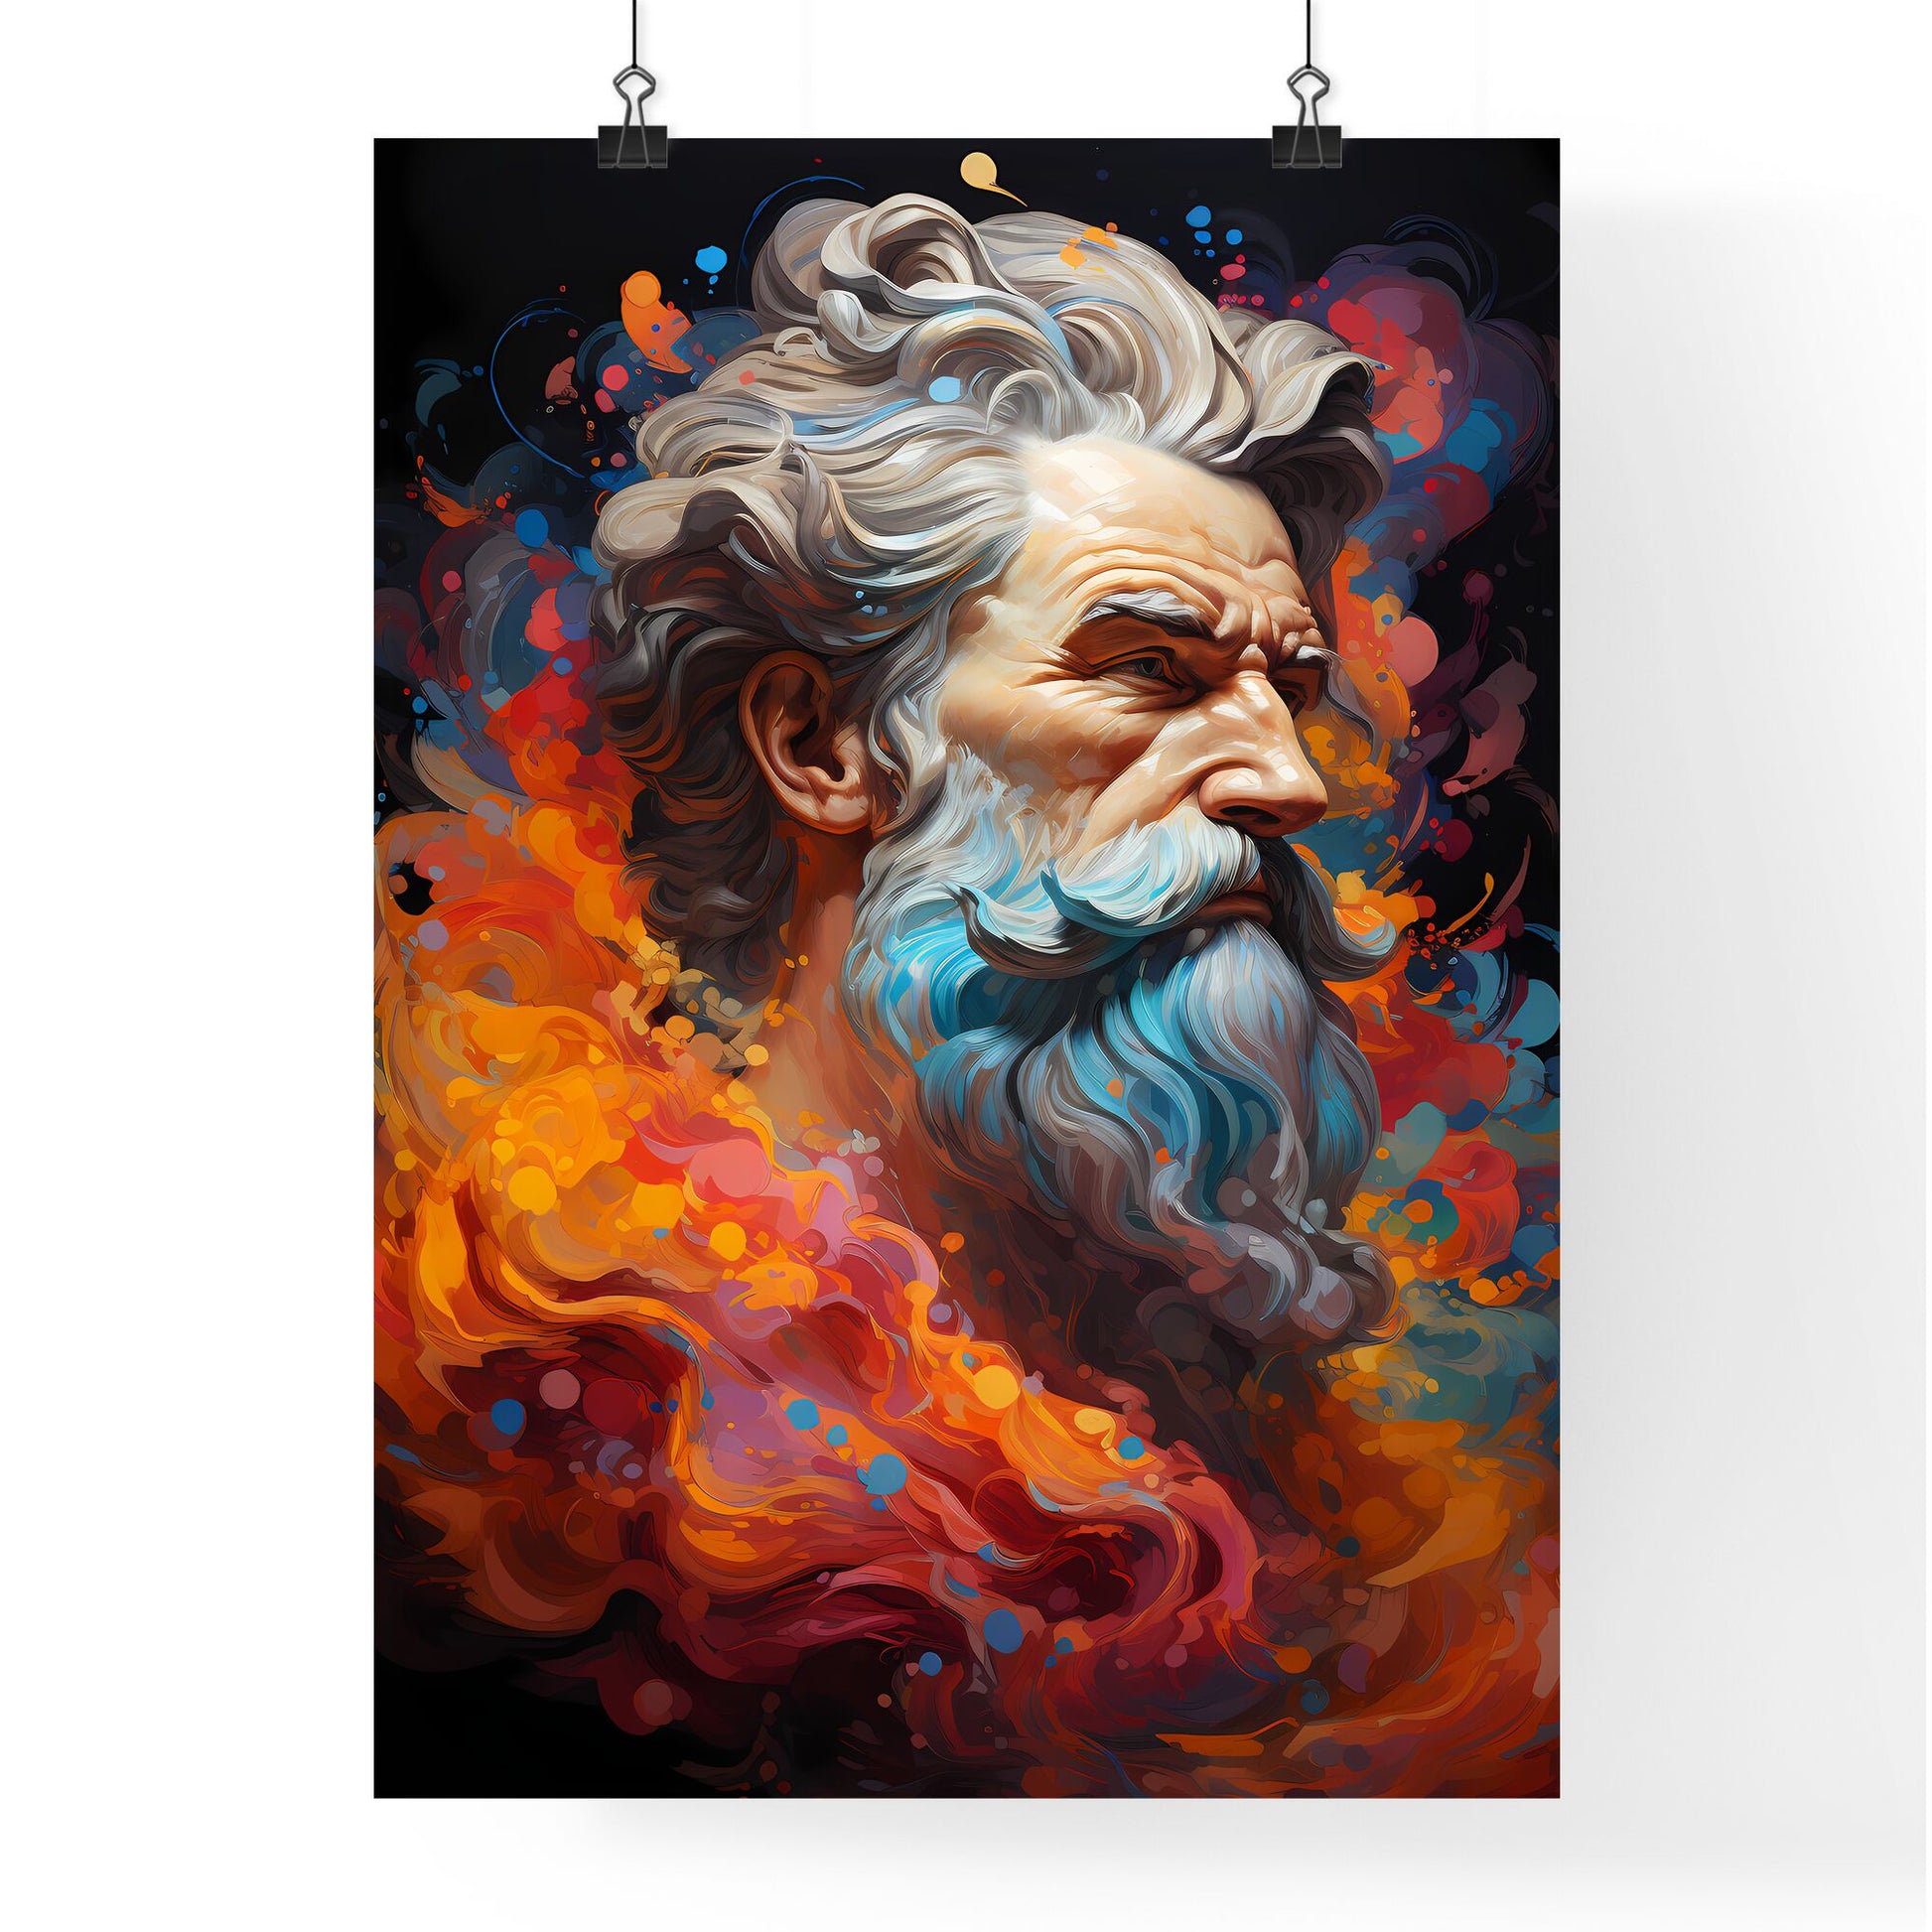 Aristoteles Explains The World - A Painting Of A Man With A Beard Default Title